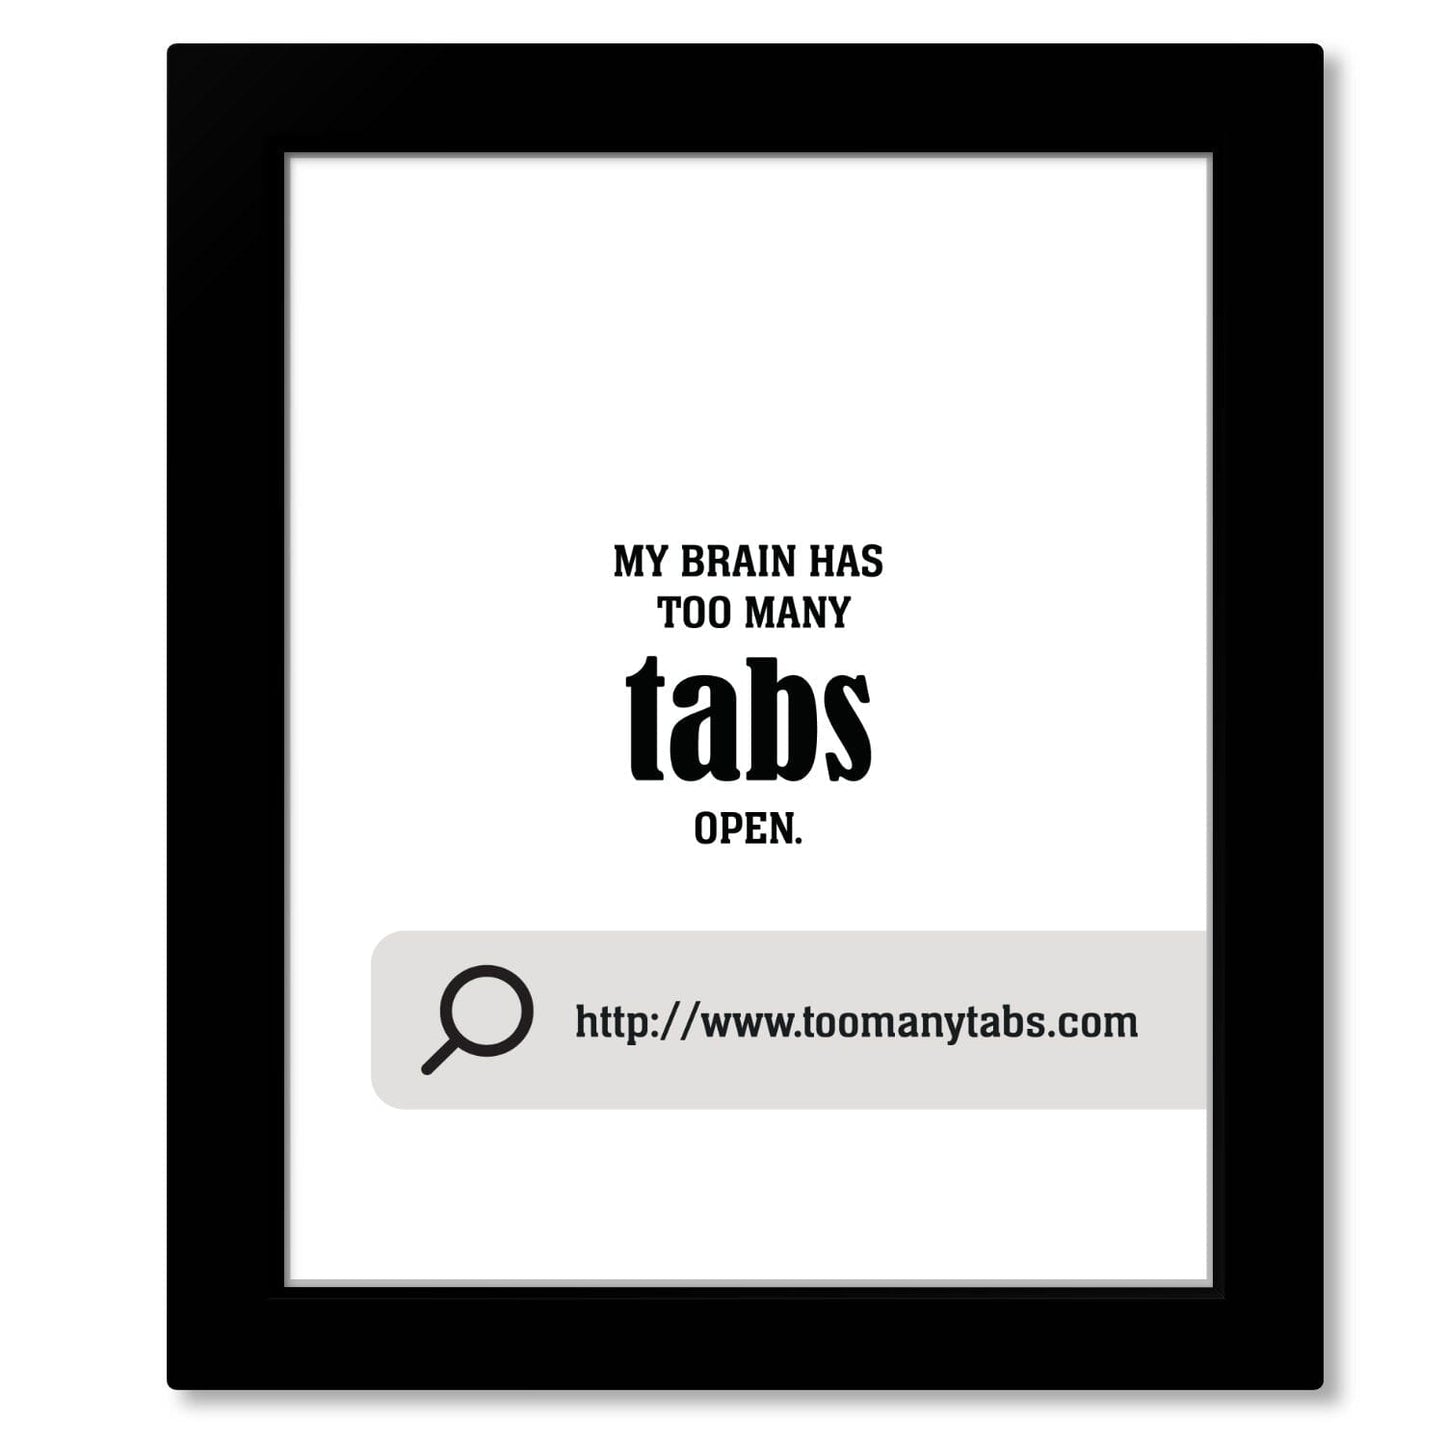 My Brain Has Too Many Tabs Open - Wise and Witty Wall Art Wise and Wiseass Quotes Song Lyrics Art 8x10 Framed Print 